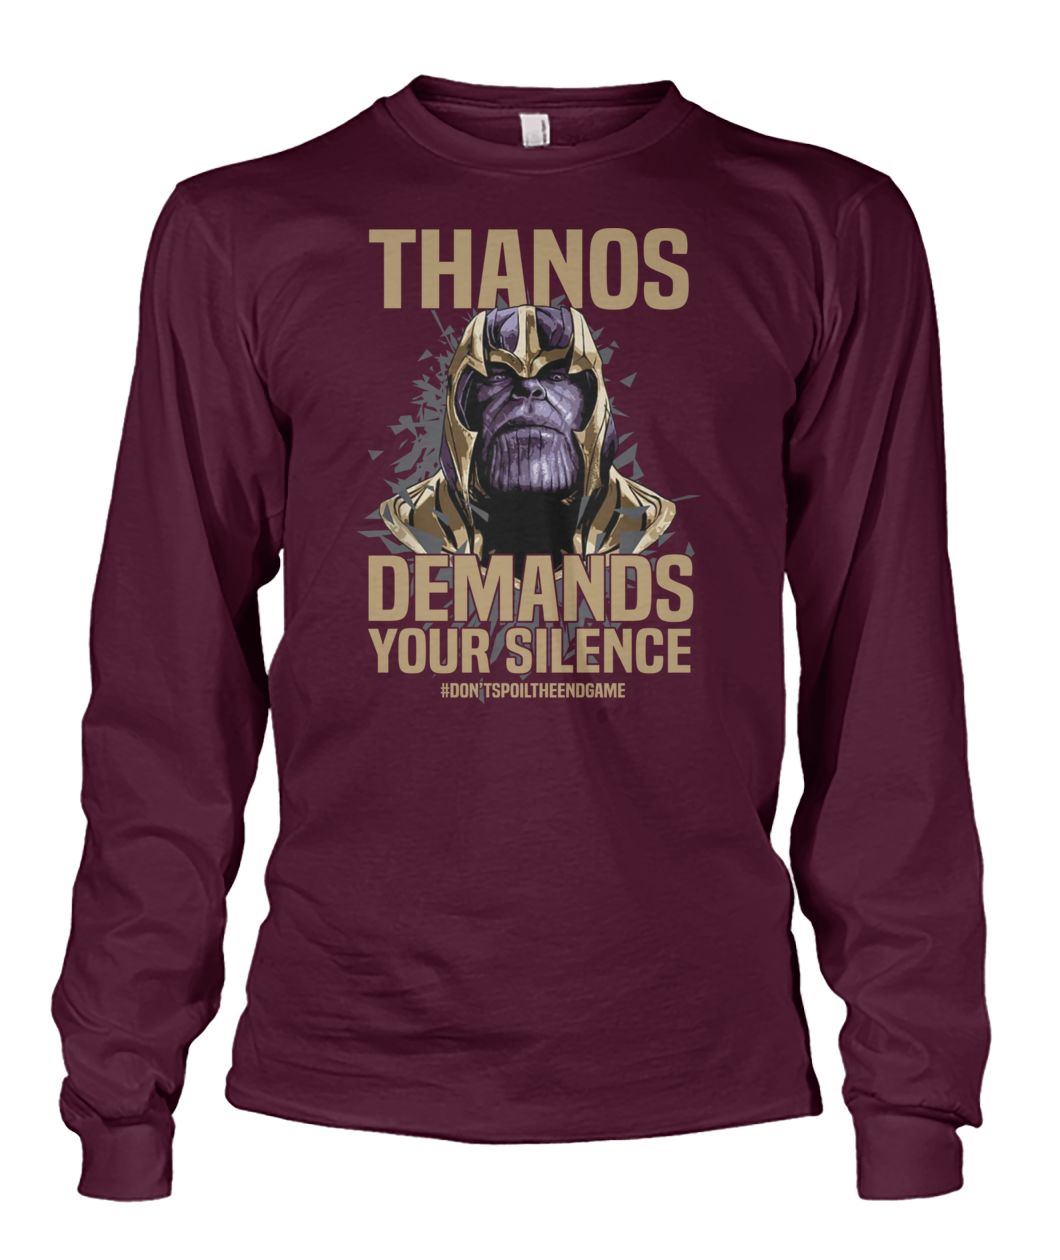 Thanos demands your silence don't spoil the endgame unisex long sleeve